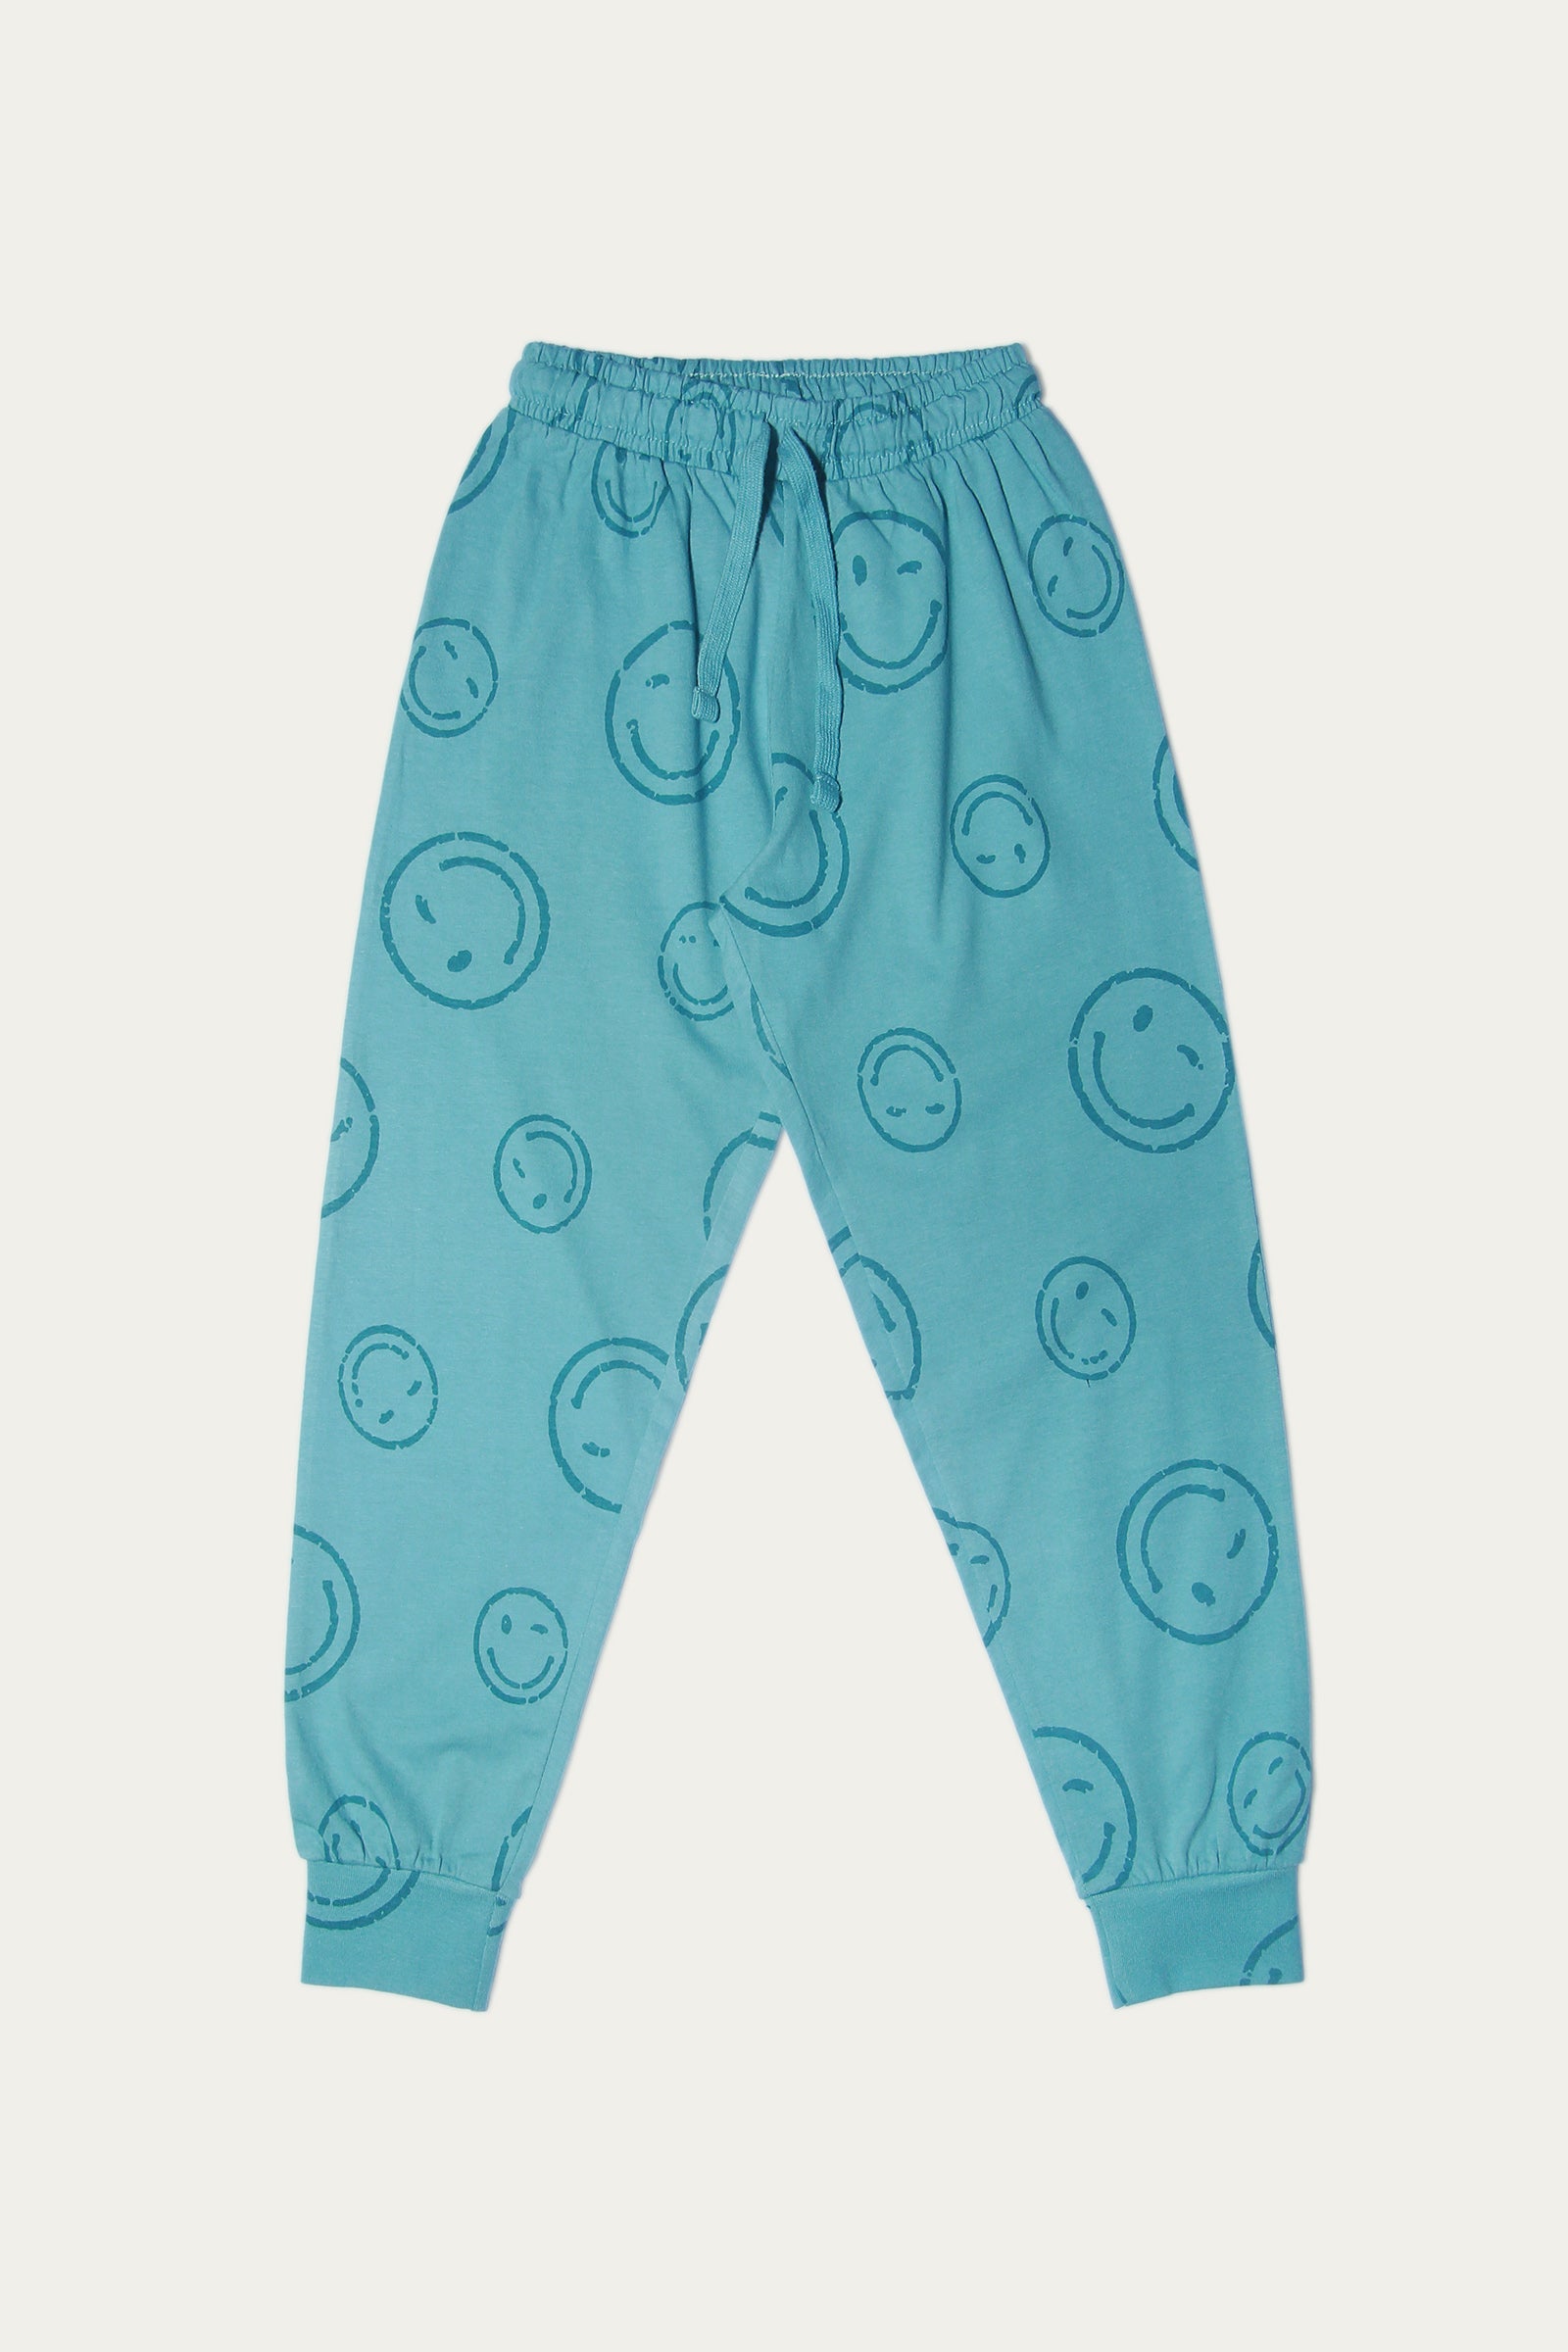 SMILEY ROTARY PRINT NIGHT SUIT (SSGNW-79)